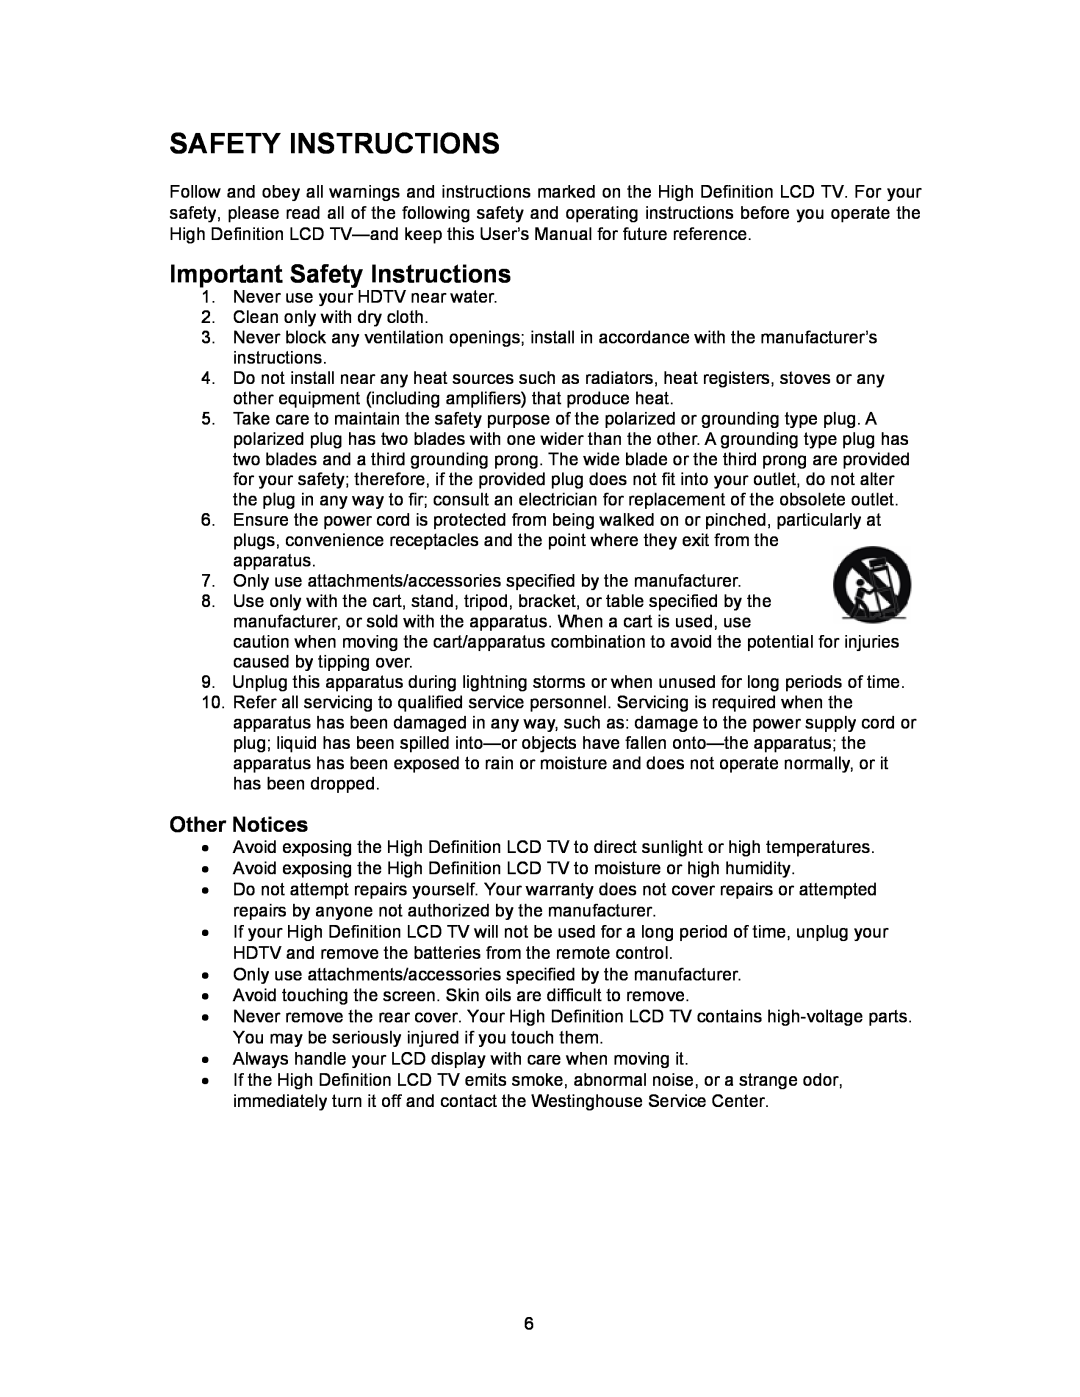 Westinghouse SK-16H120S user manual Important Safety Instructions, Other Notices 